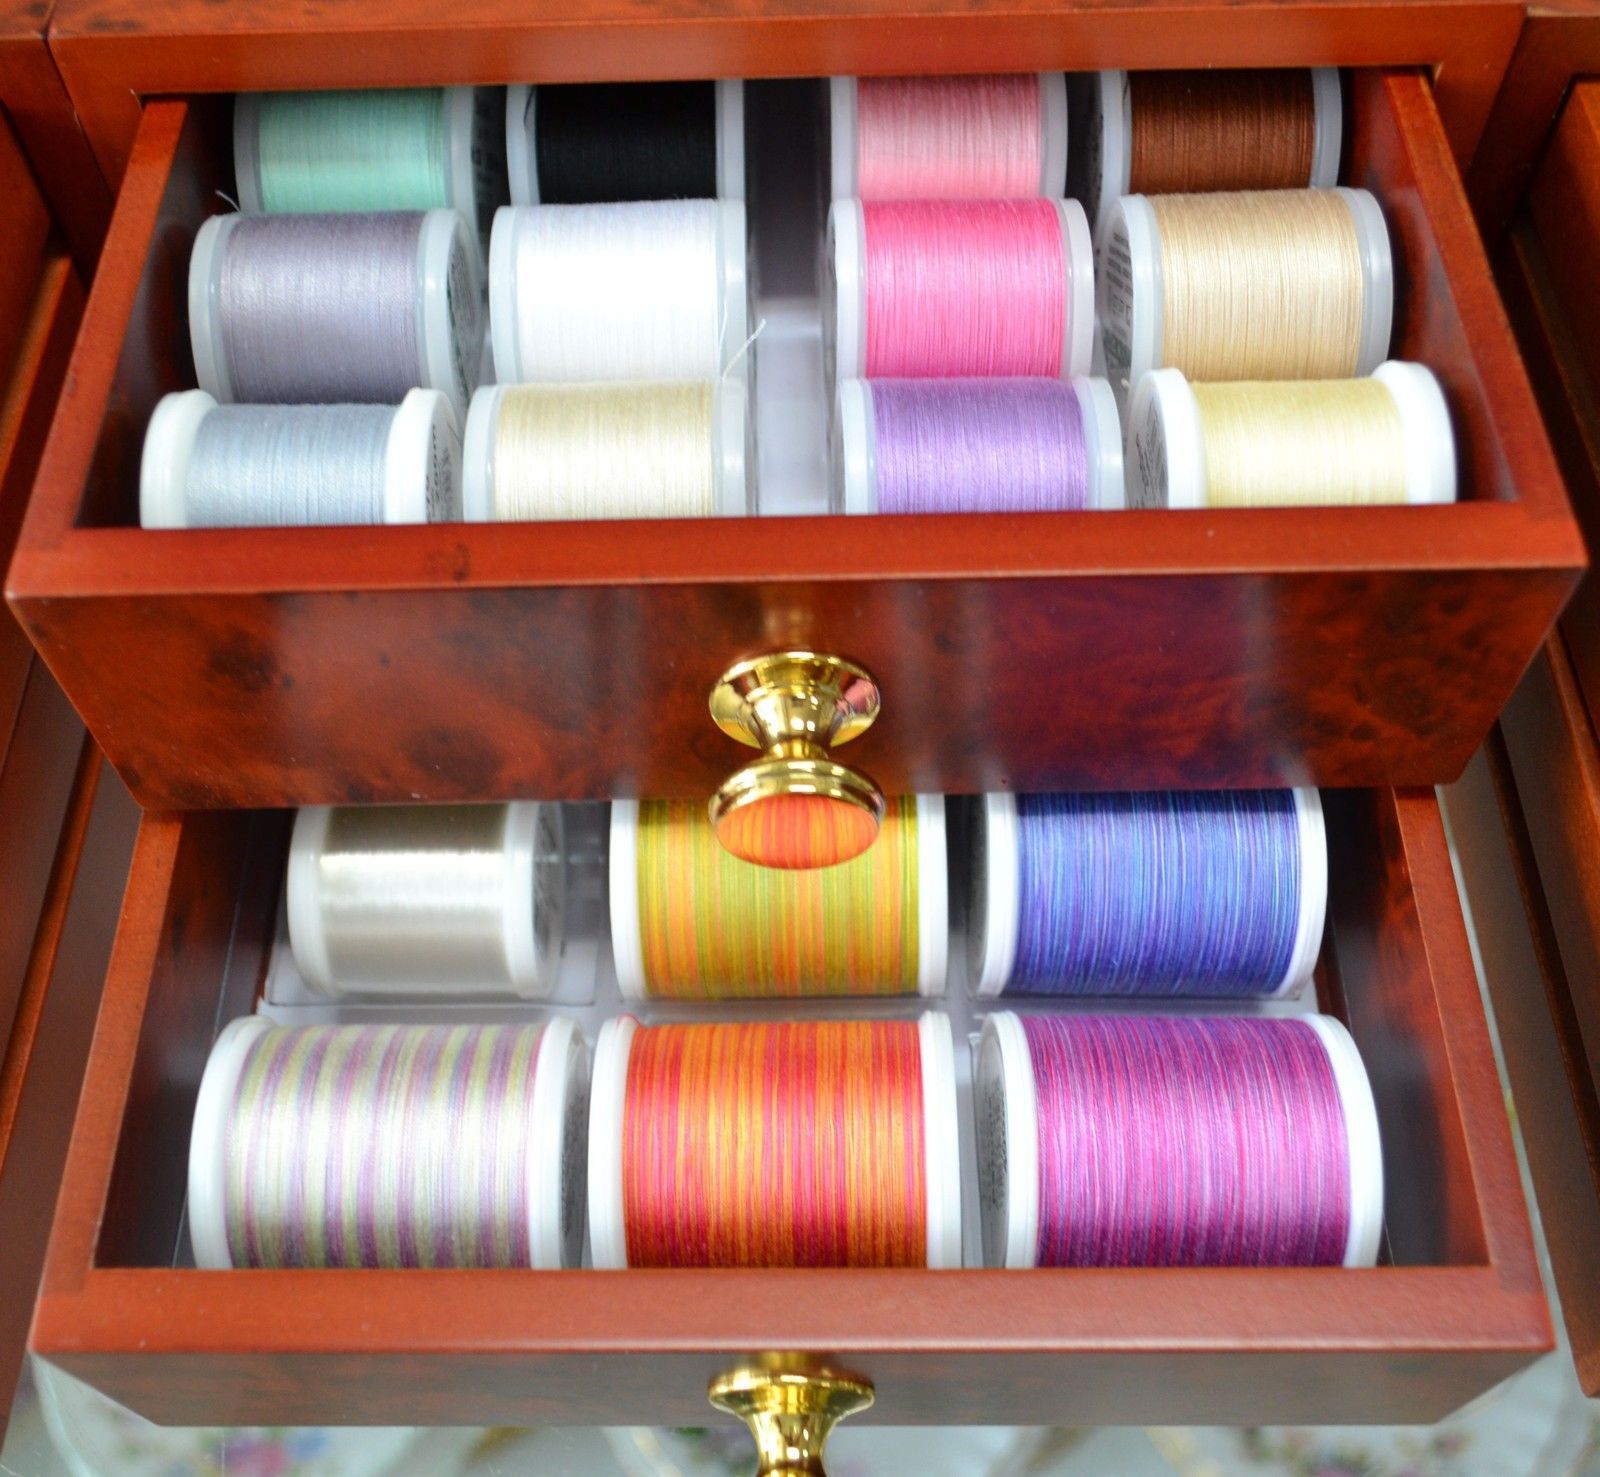 Madeira Wooden Thread Treasure Chest contains 194 sewing threads